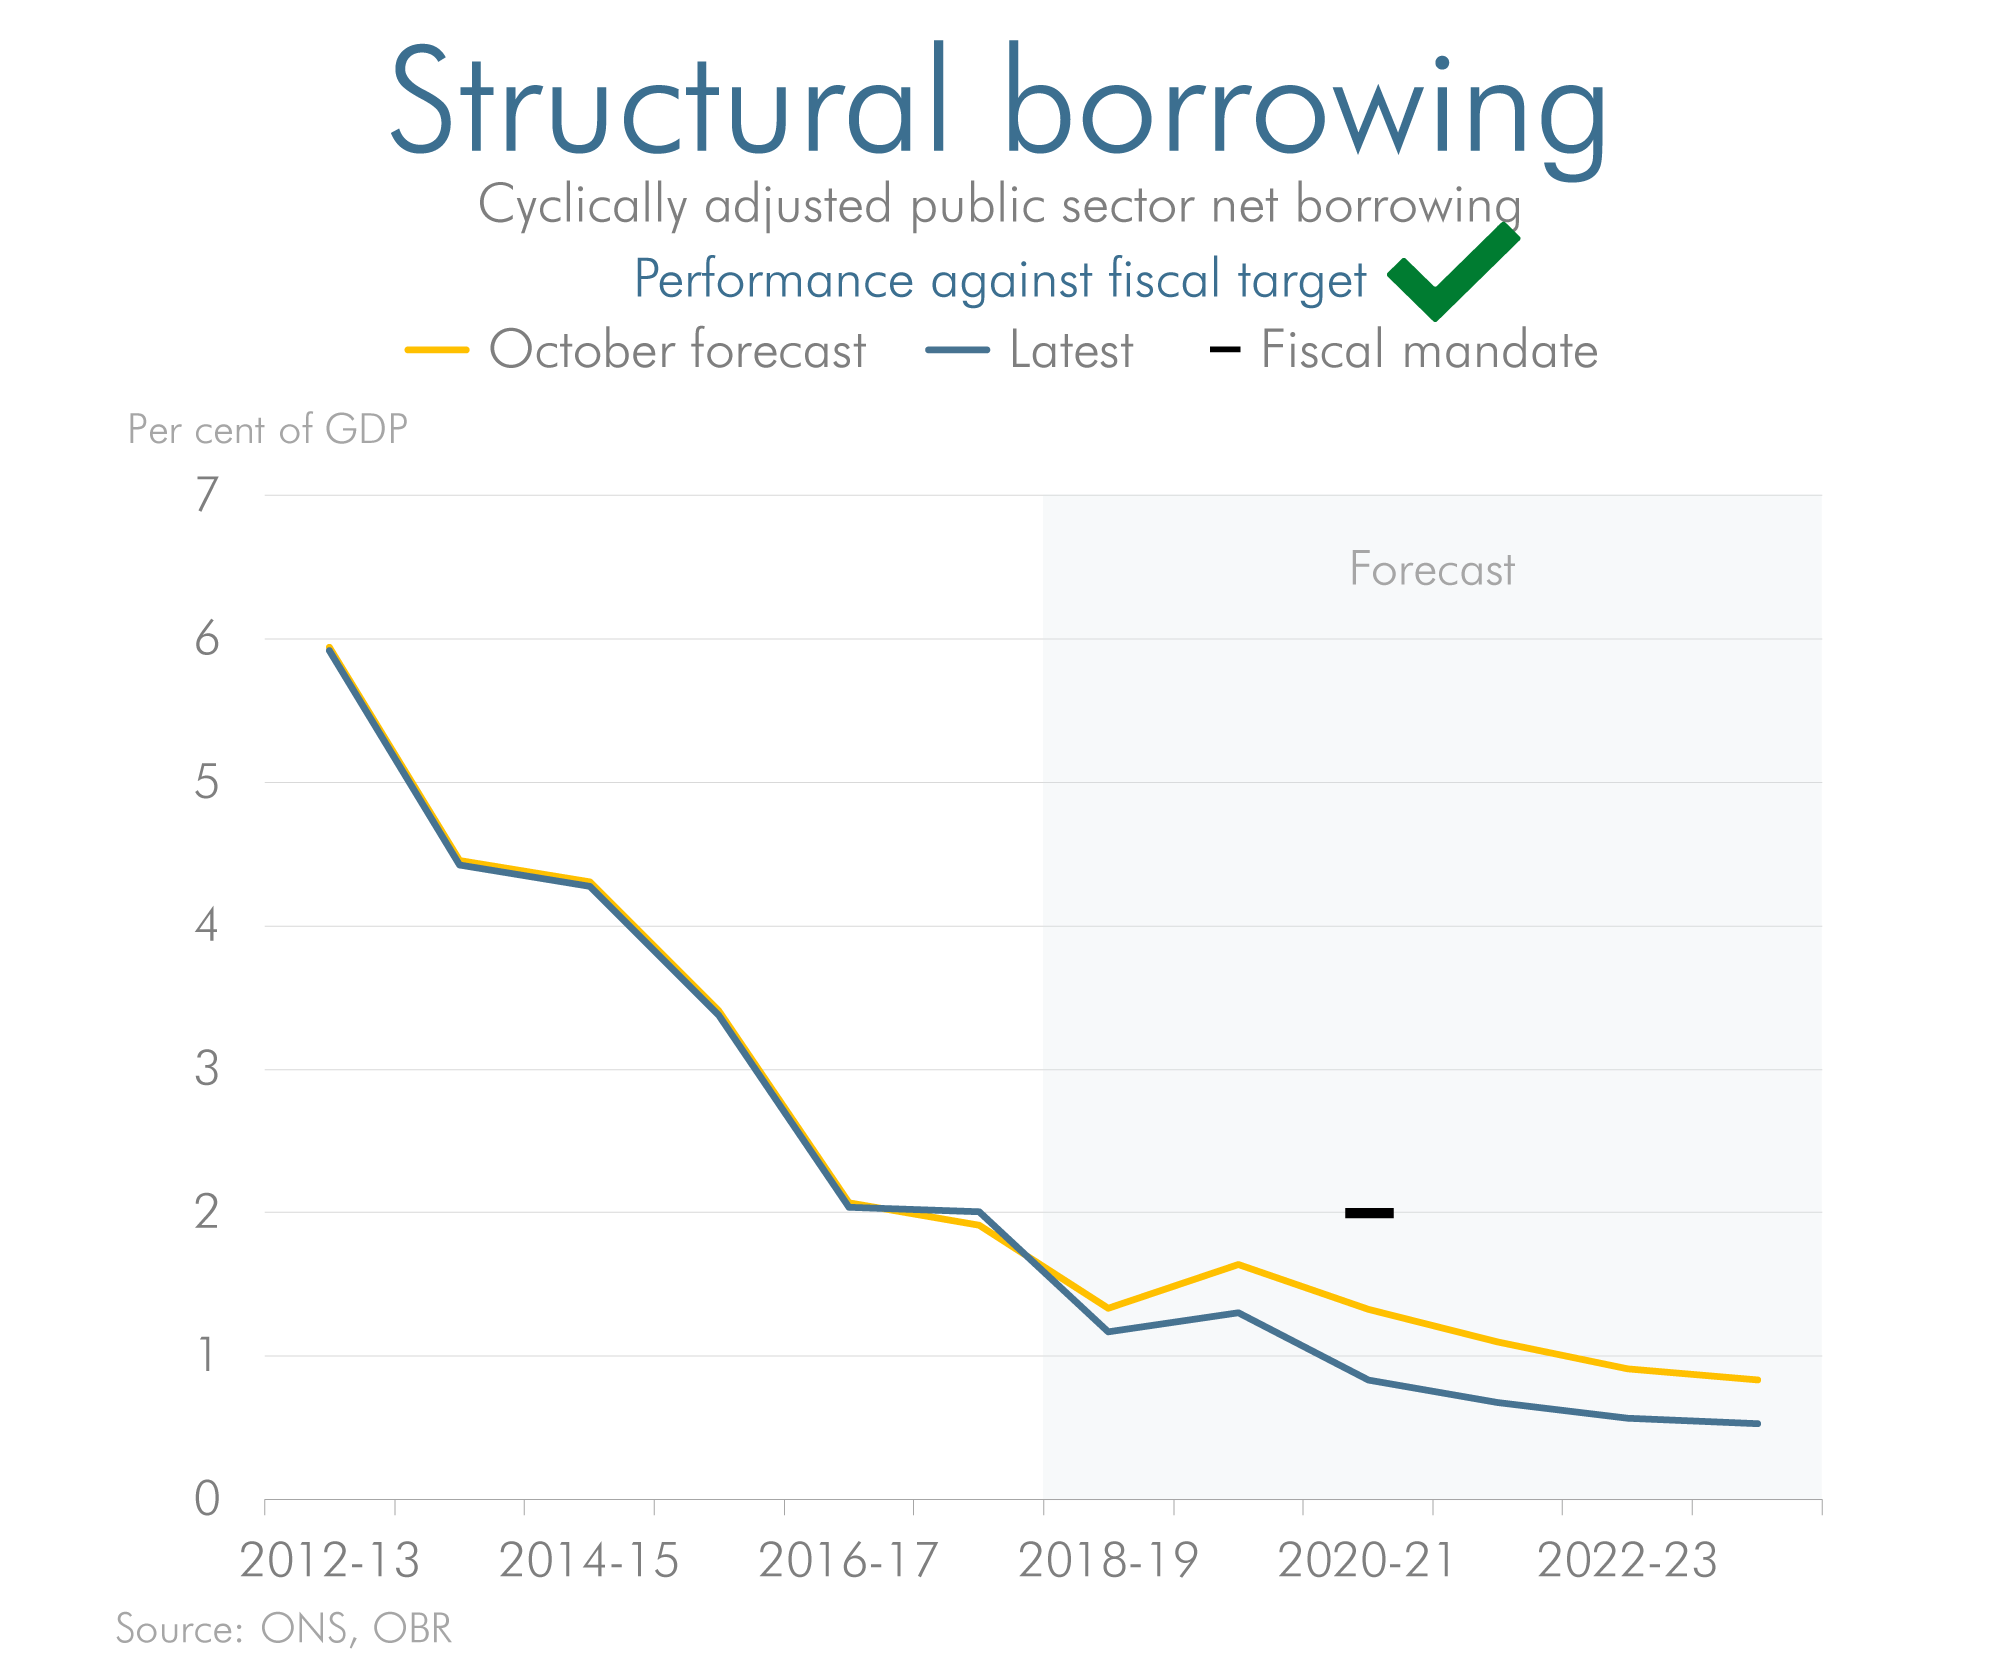 Latest forecast versus previous forecast for structural borrowing